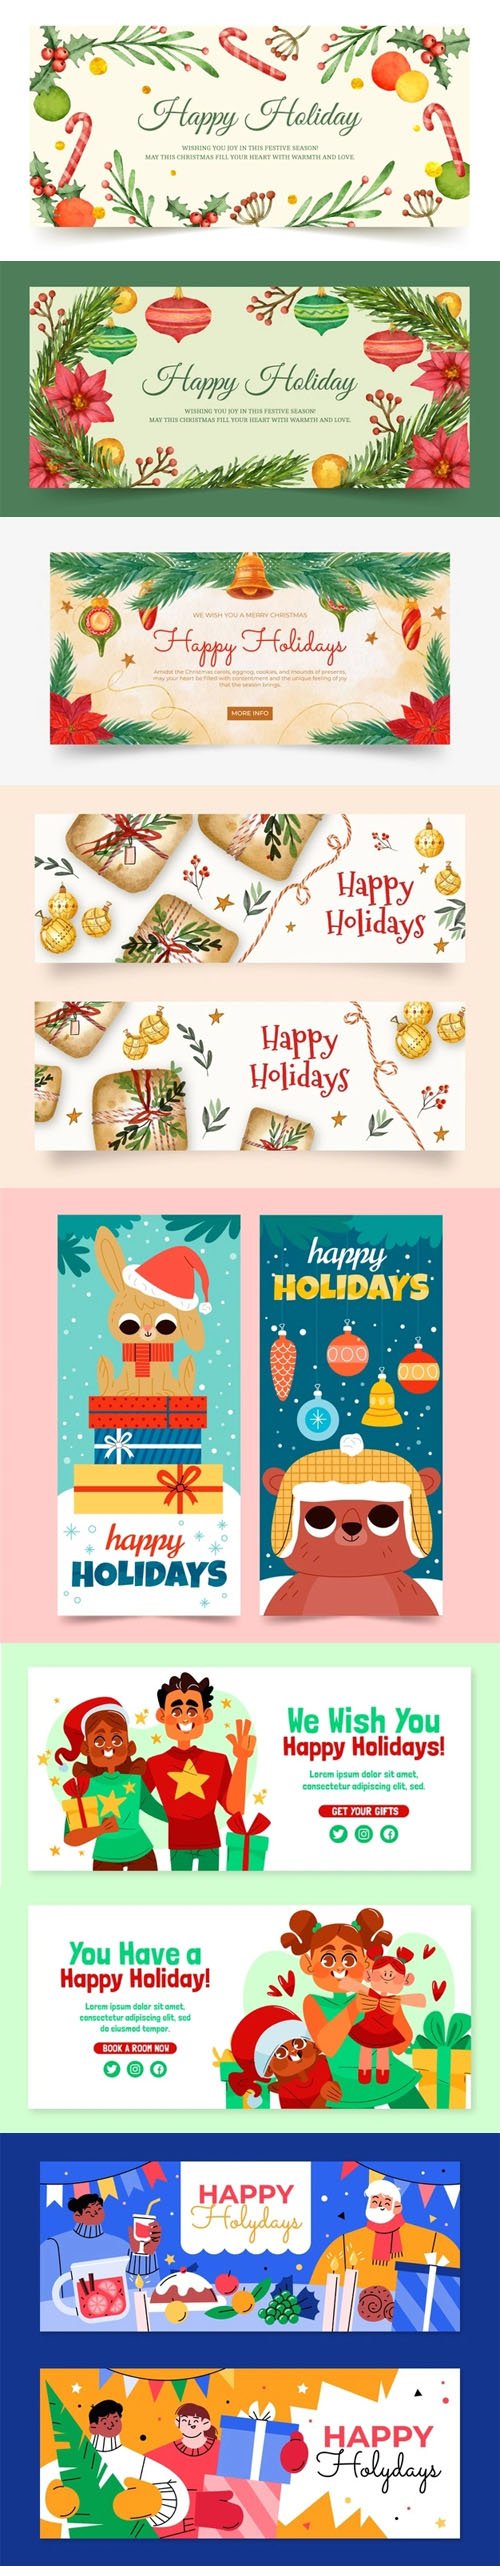 Hand Drawn Happy Holidays Banners Collection Vol.2 - 8 Vector Templates